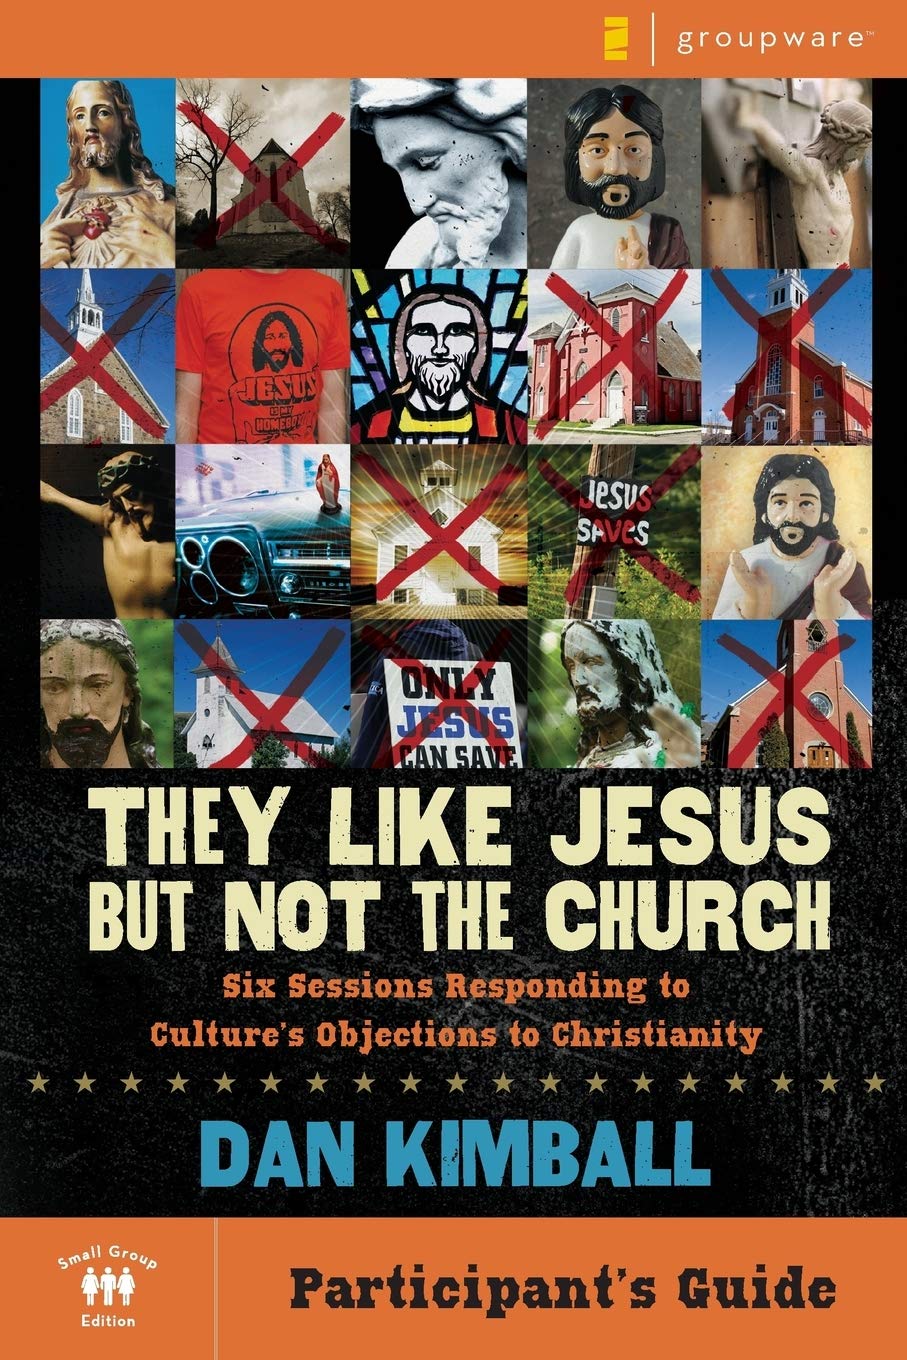 They Like Jesus But Not the Church: Responding to Culture's Objections to Christianity